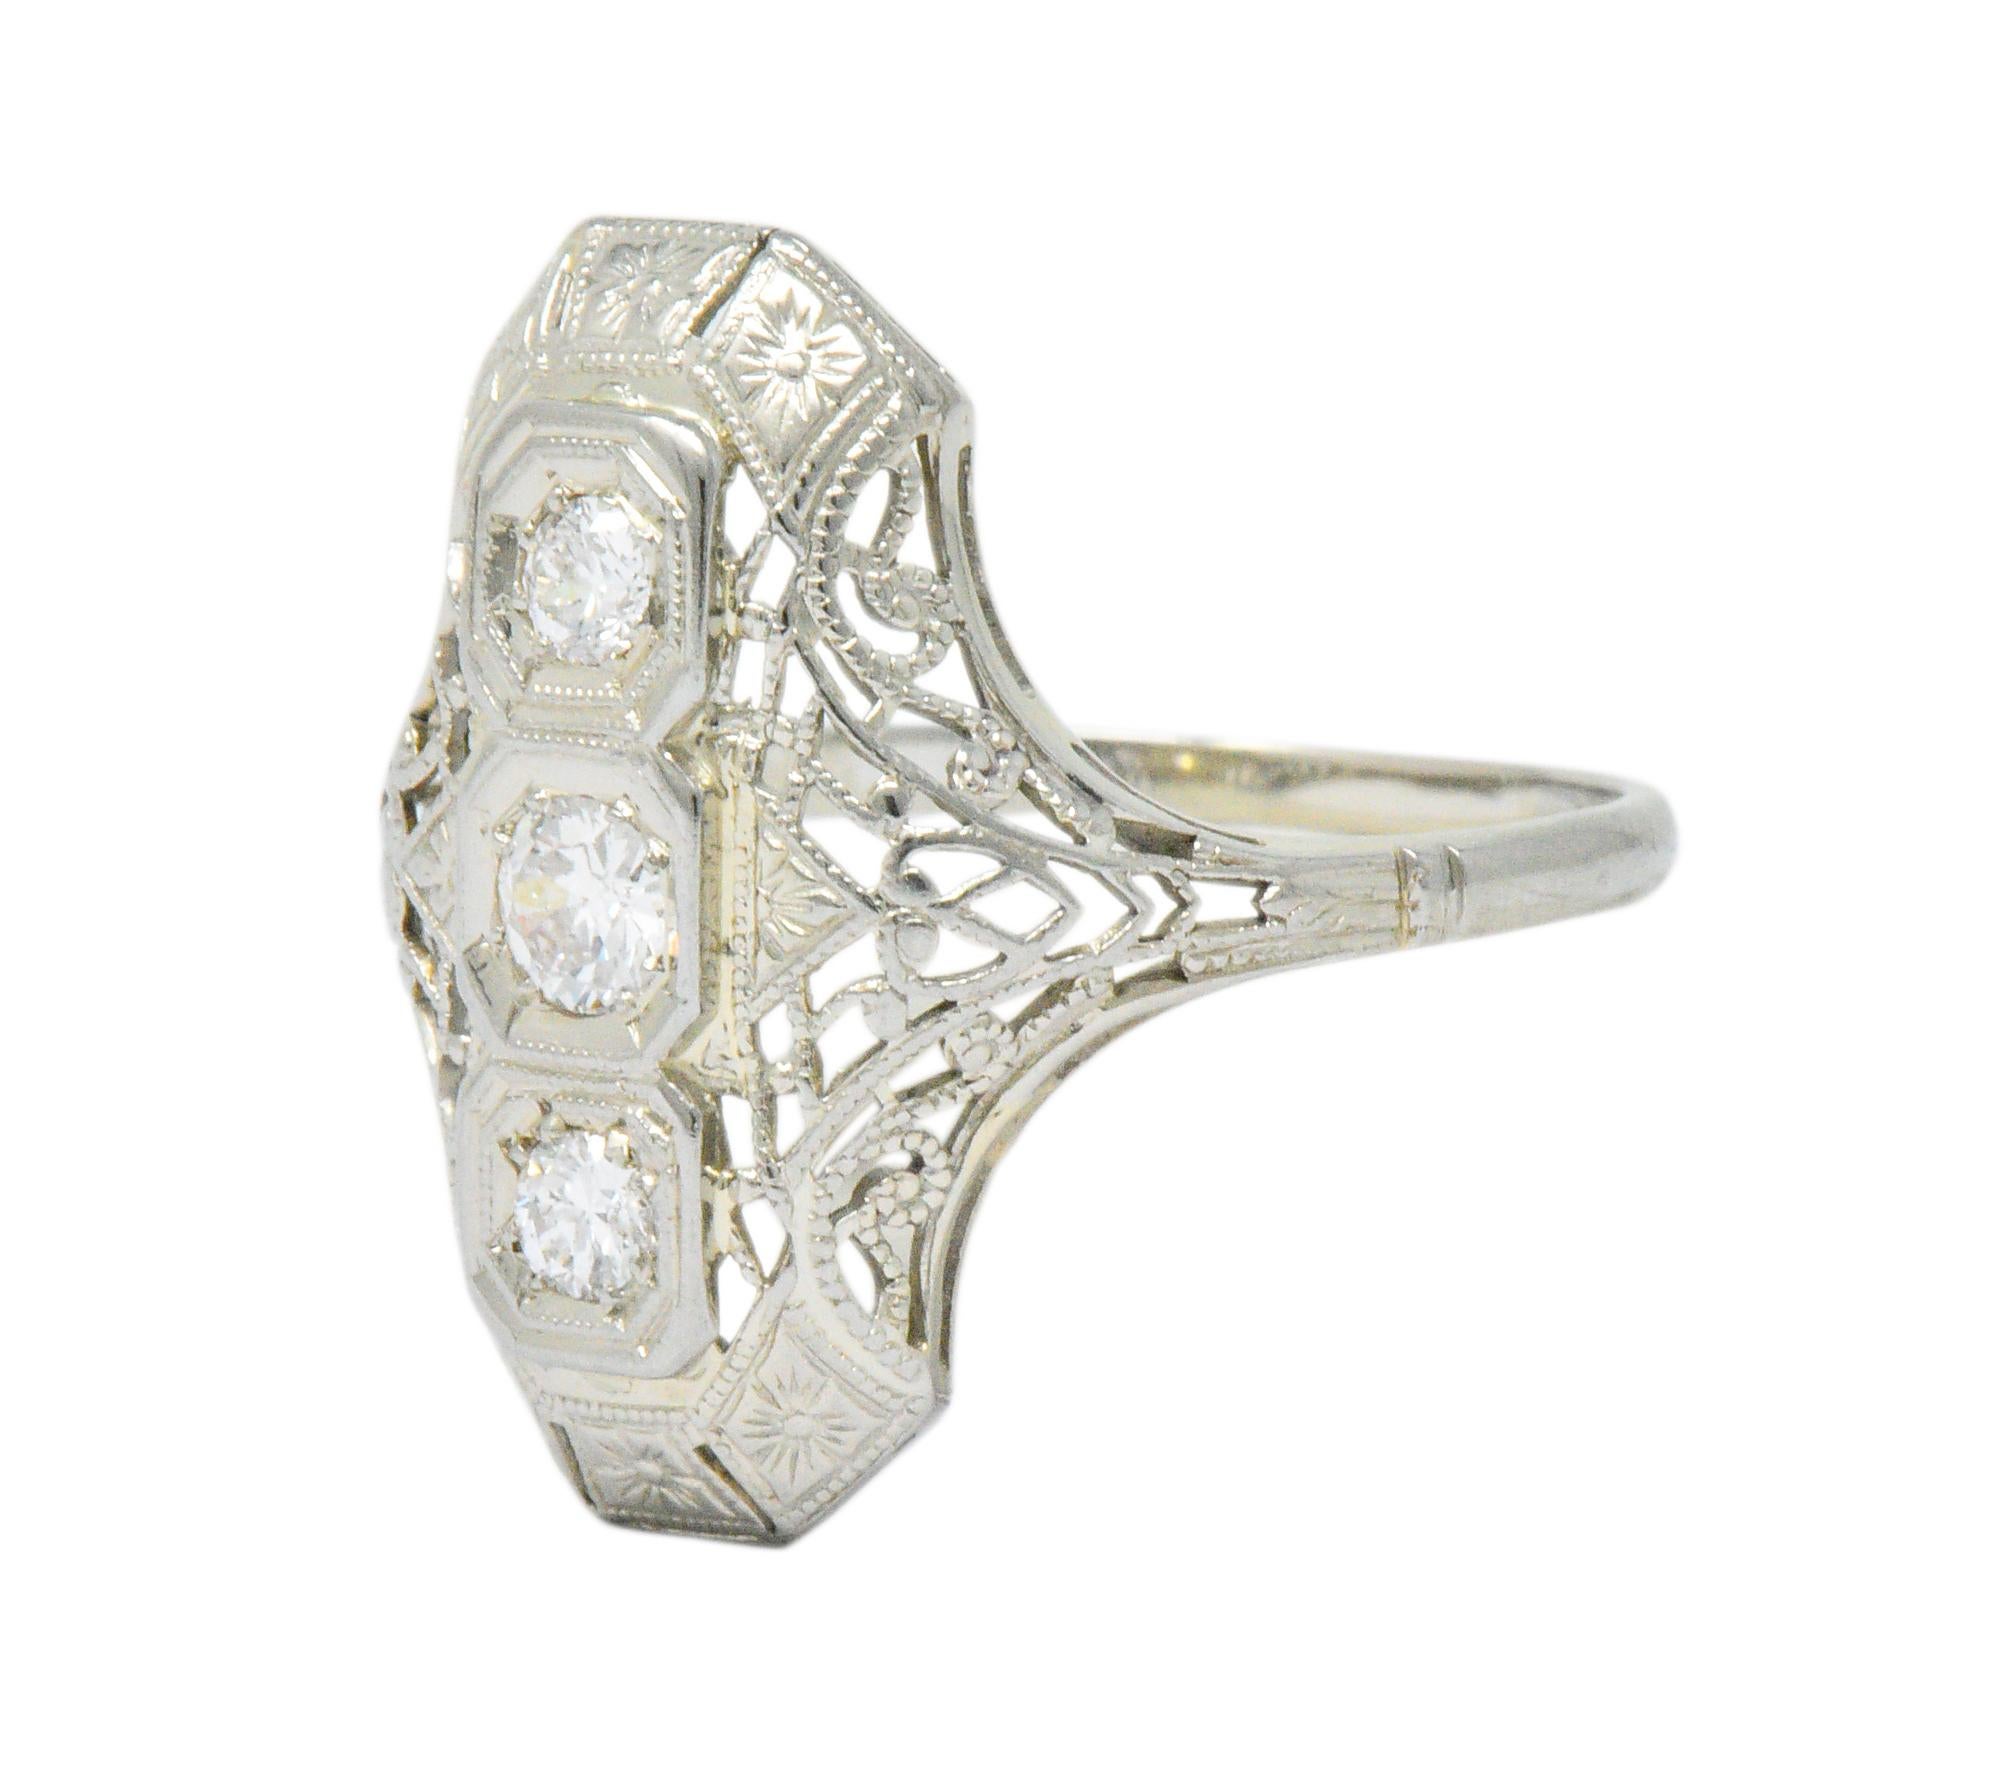 Dinner style ring centering three cushion forms set North to South with three old European cut diamonds

Weighing approximately 0.40 carat with G to I color and VS to SI clarity

Completed by pierced lattice work, milgrain detail, and deeply